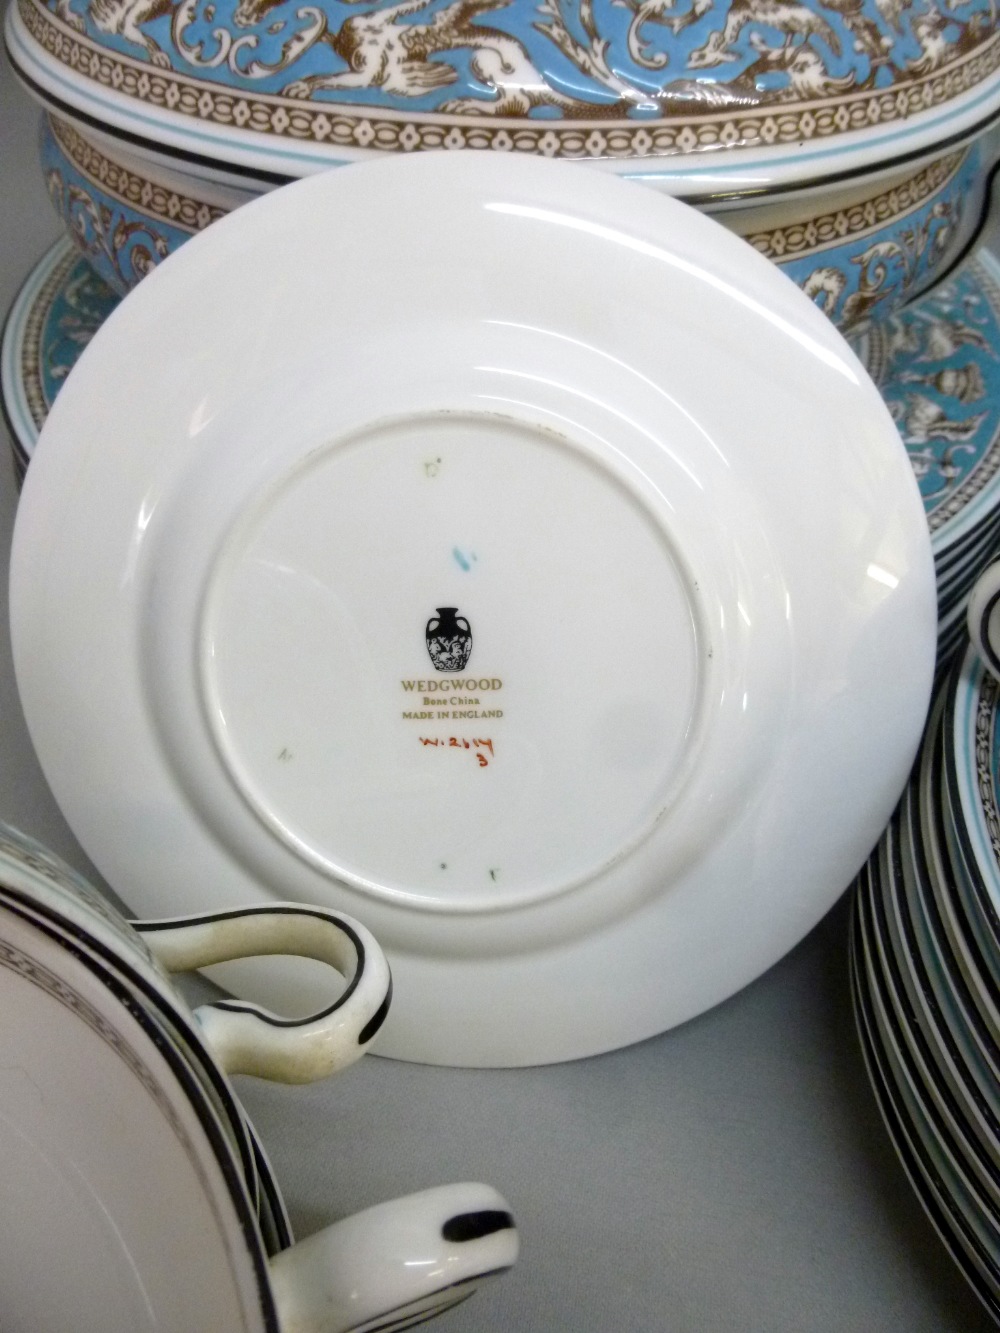 WEDGWOOD BONE CHINA 'FLORENTINE' PART DINNER SET COMPRISING 7 x SOUP CUPS, 8 x SOUP SAUCERS, 7 x - Image 3 of 7